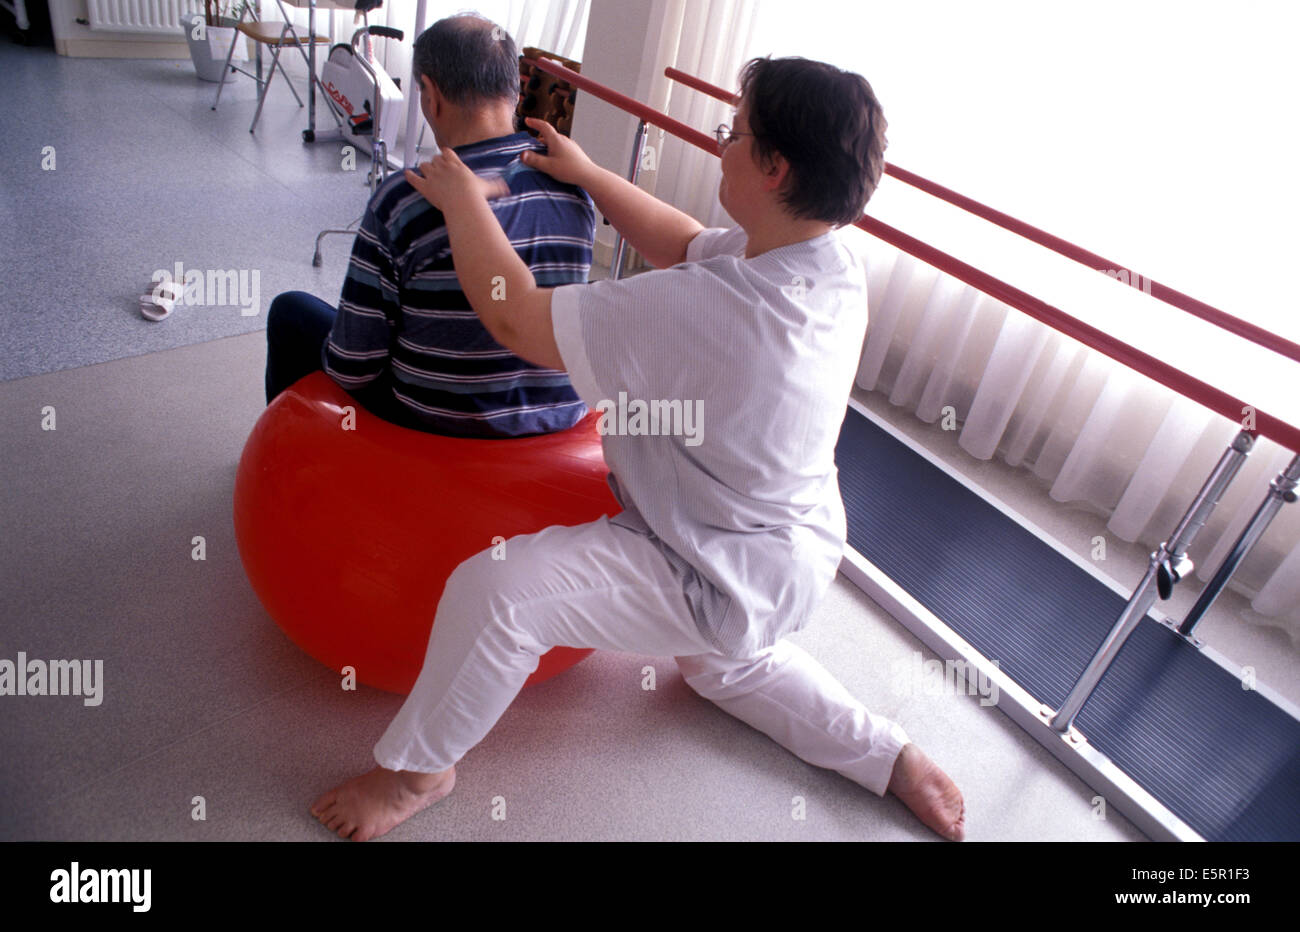 Elderly person doing functional rehabilitation exercises with a physiotherapist, Alzheimer unit of the Geriatrics department, Stock Photo